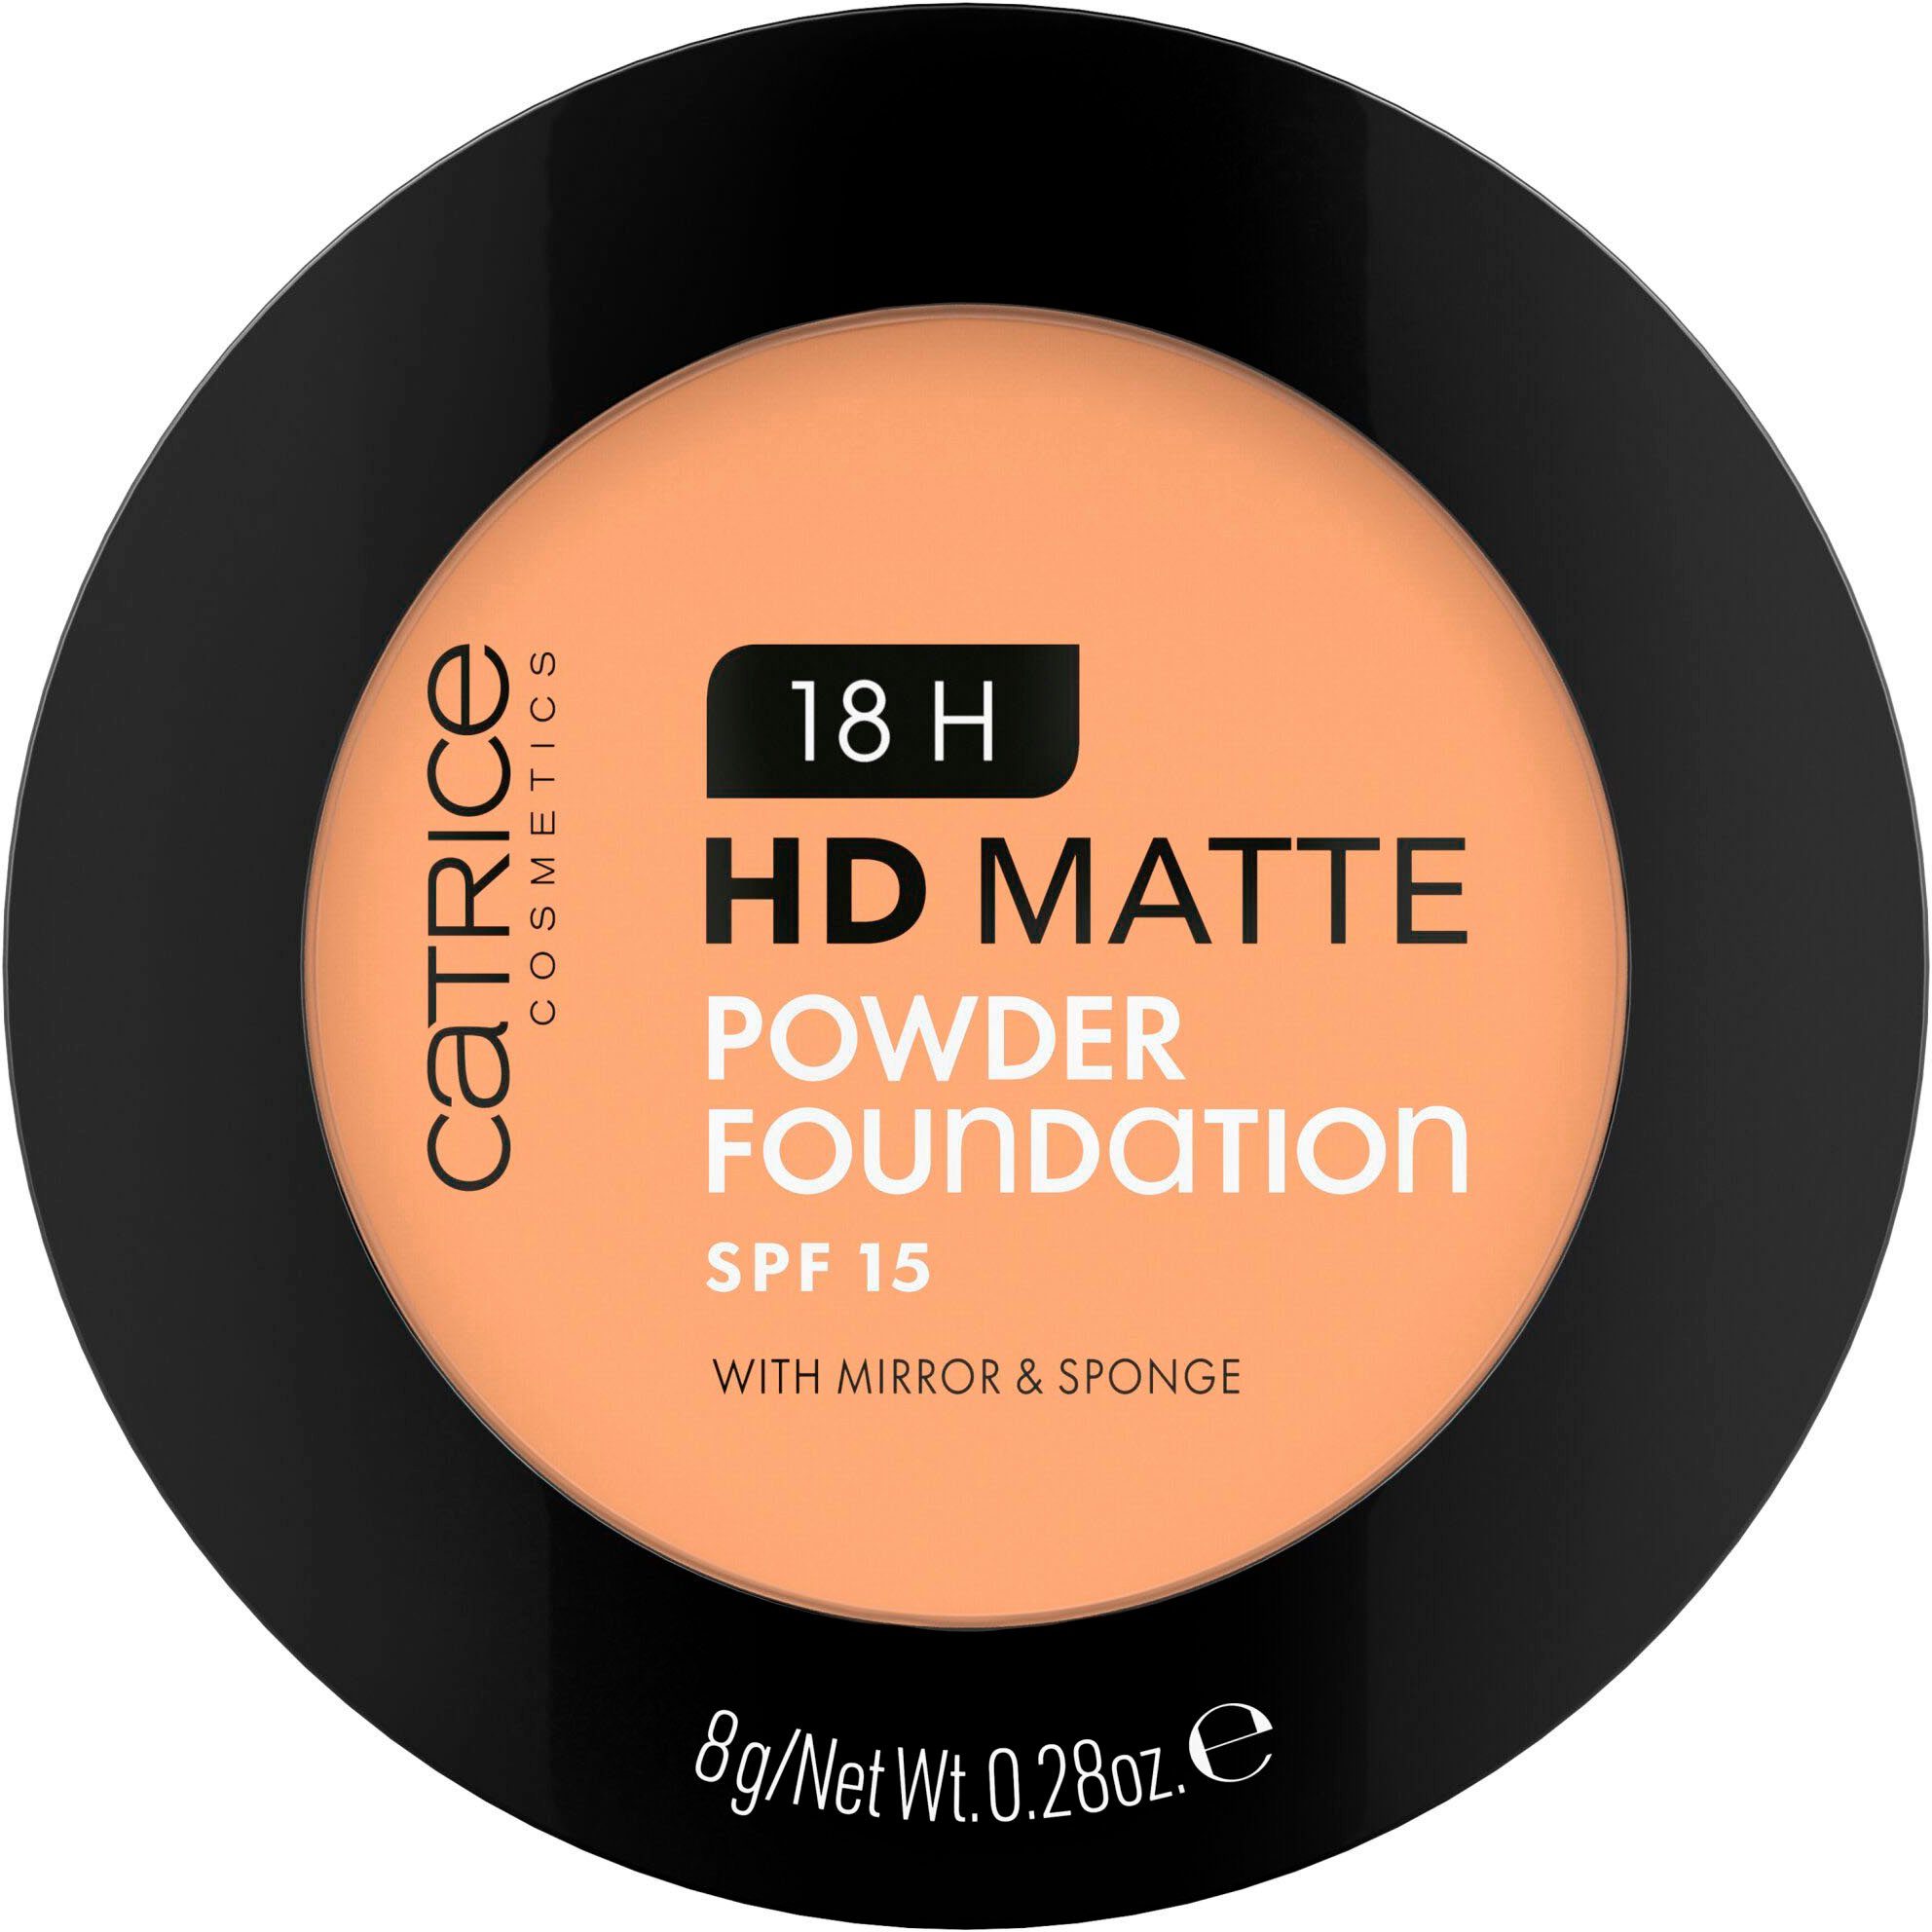 Catrice Puder 18H HD Matte Powder Foundation, 3-tlg. 045N nude